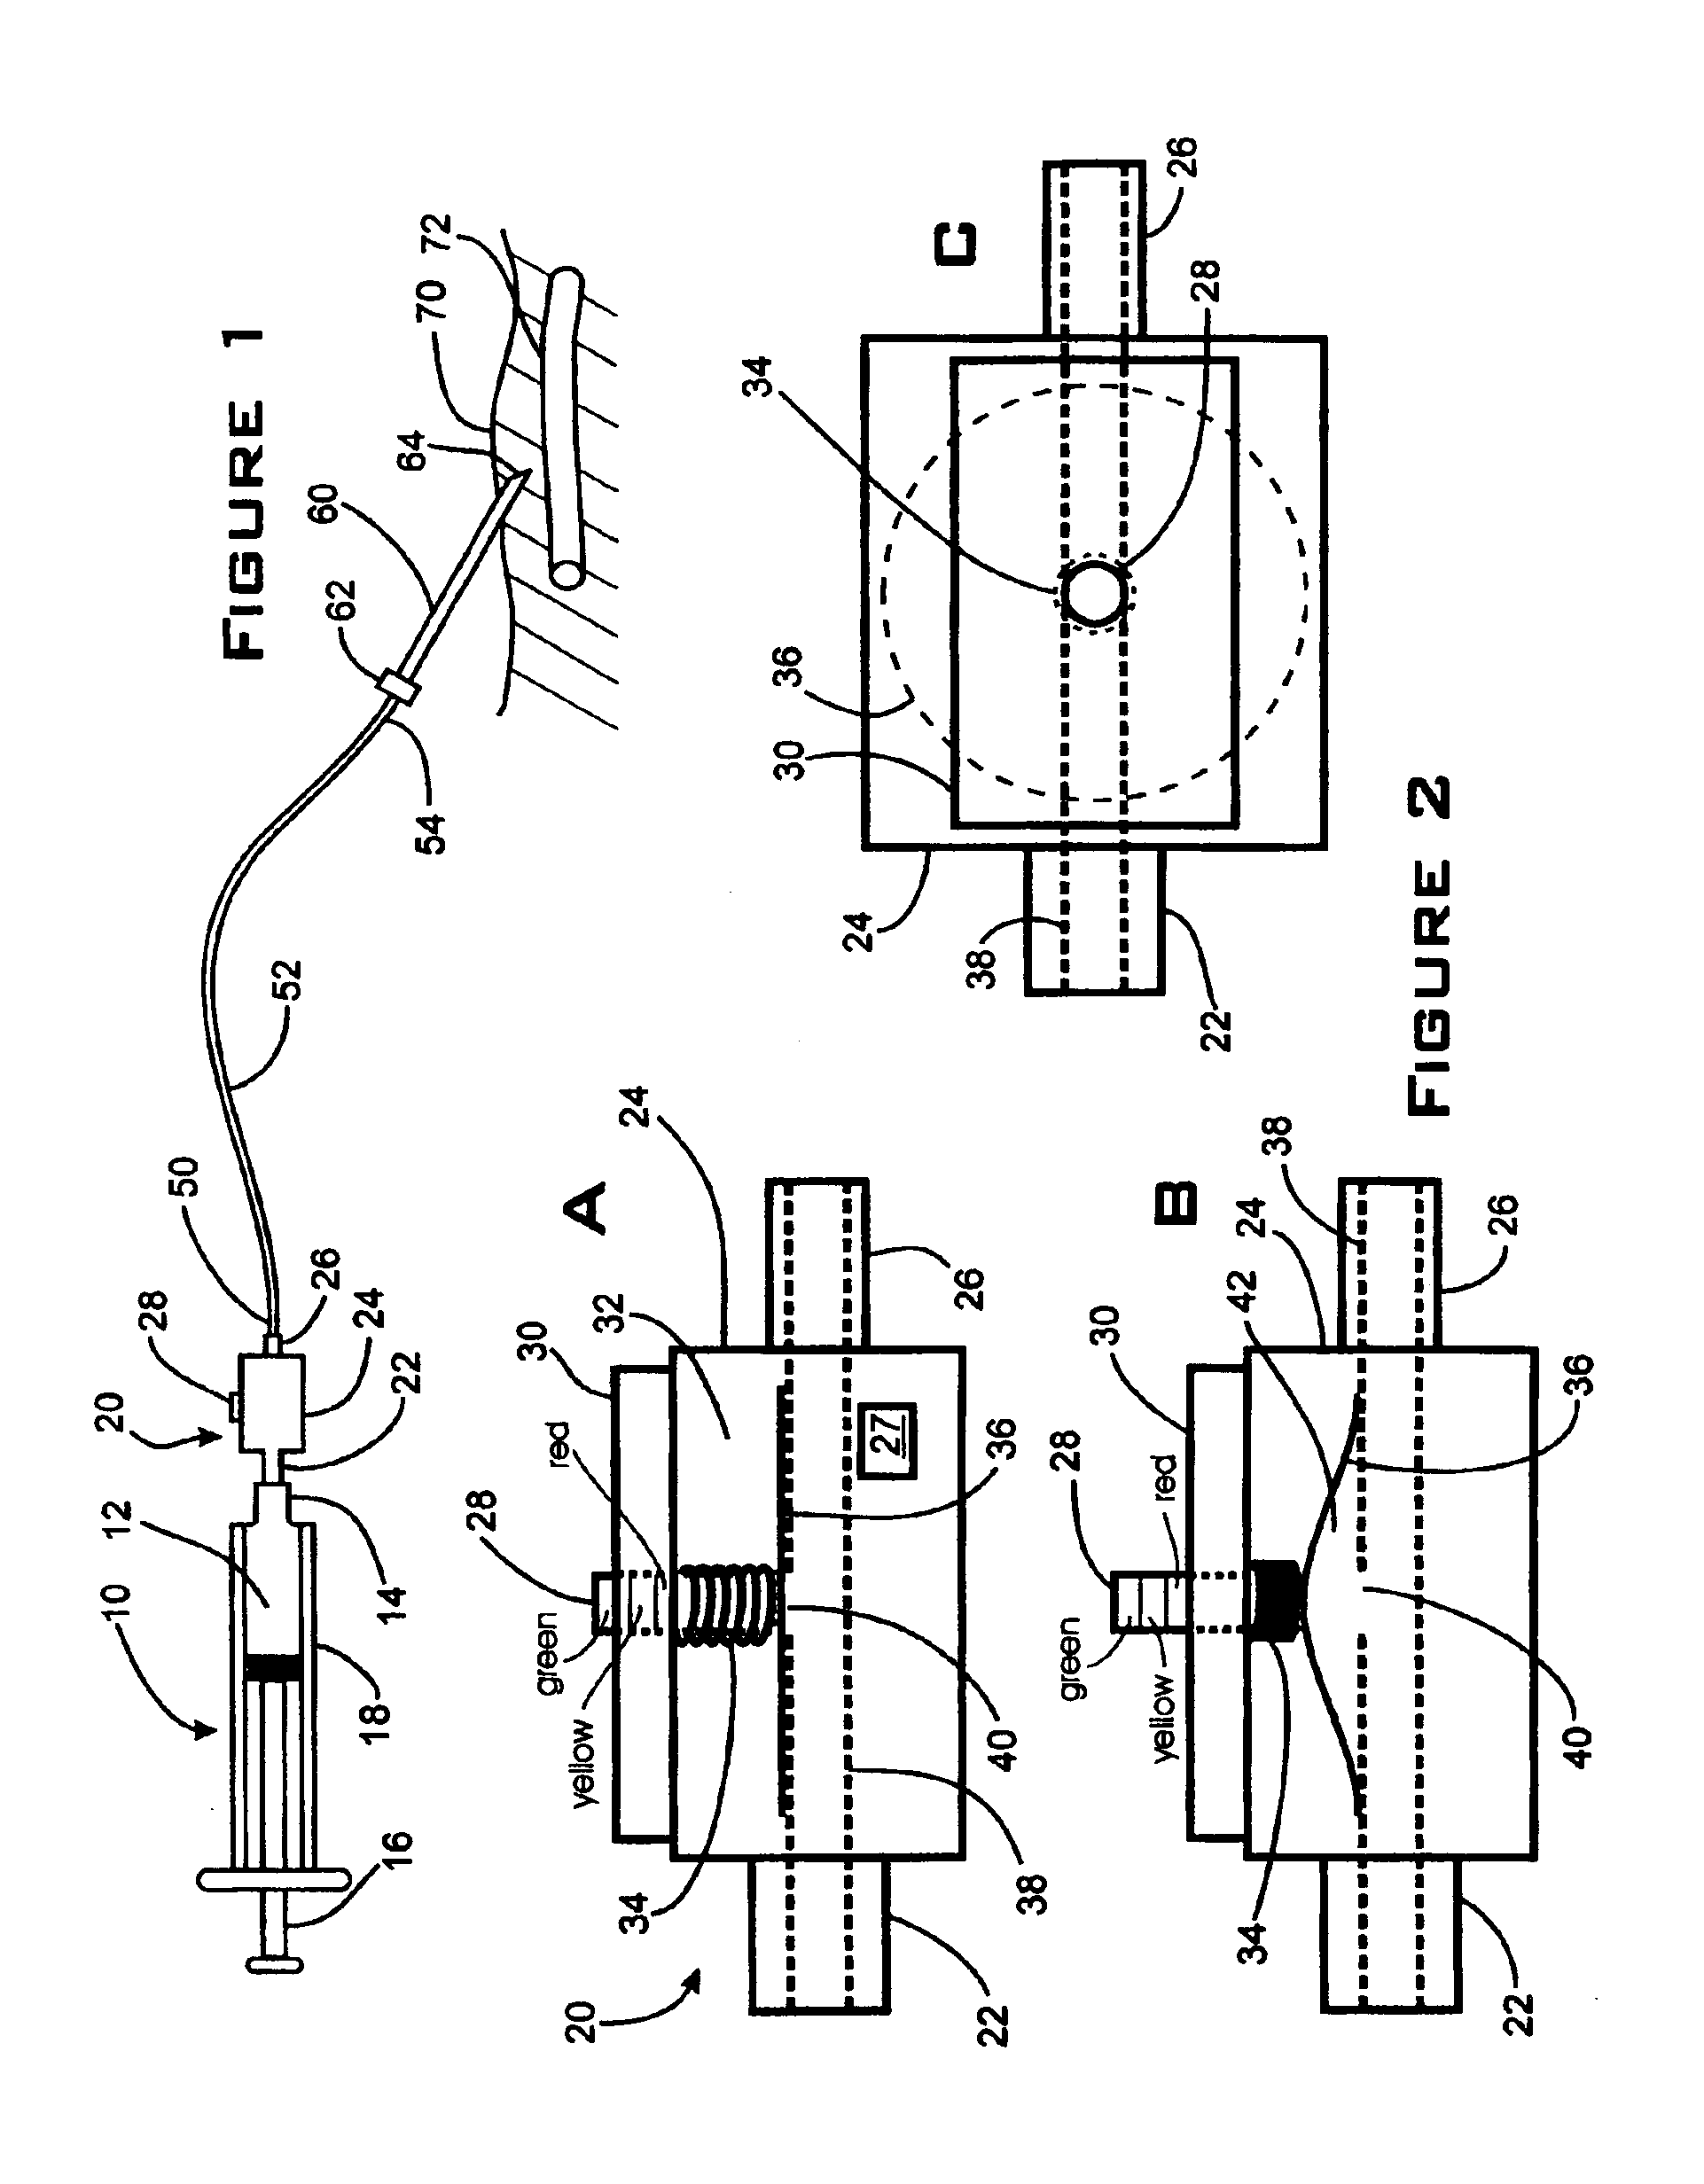 Method and apparatus to decrease the risk of intraneuronal injection during administration of nerve block anesthesia